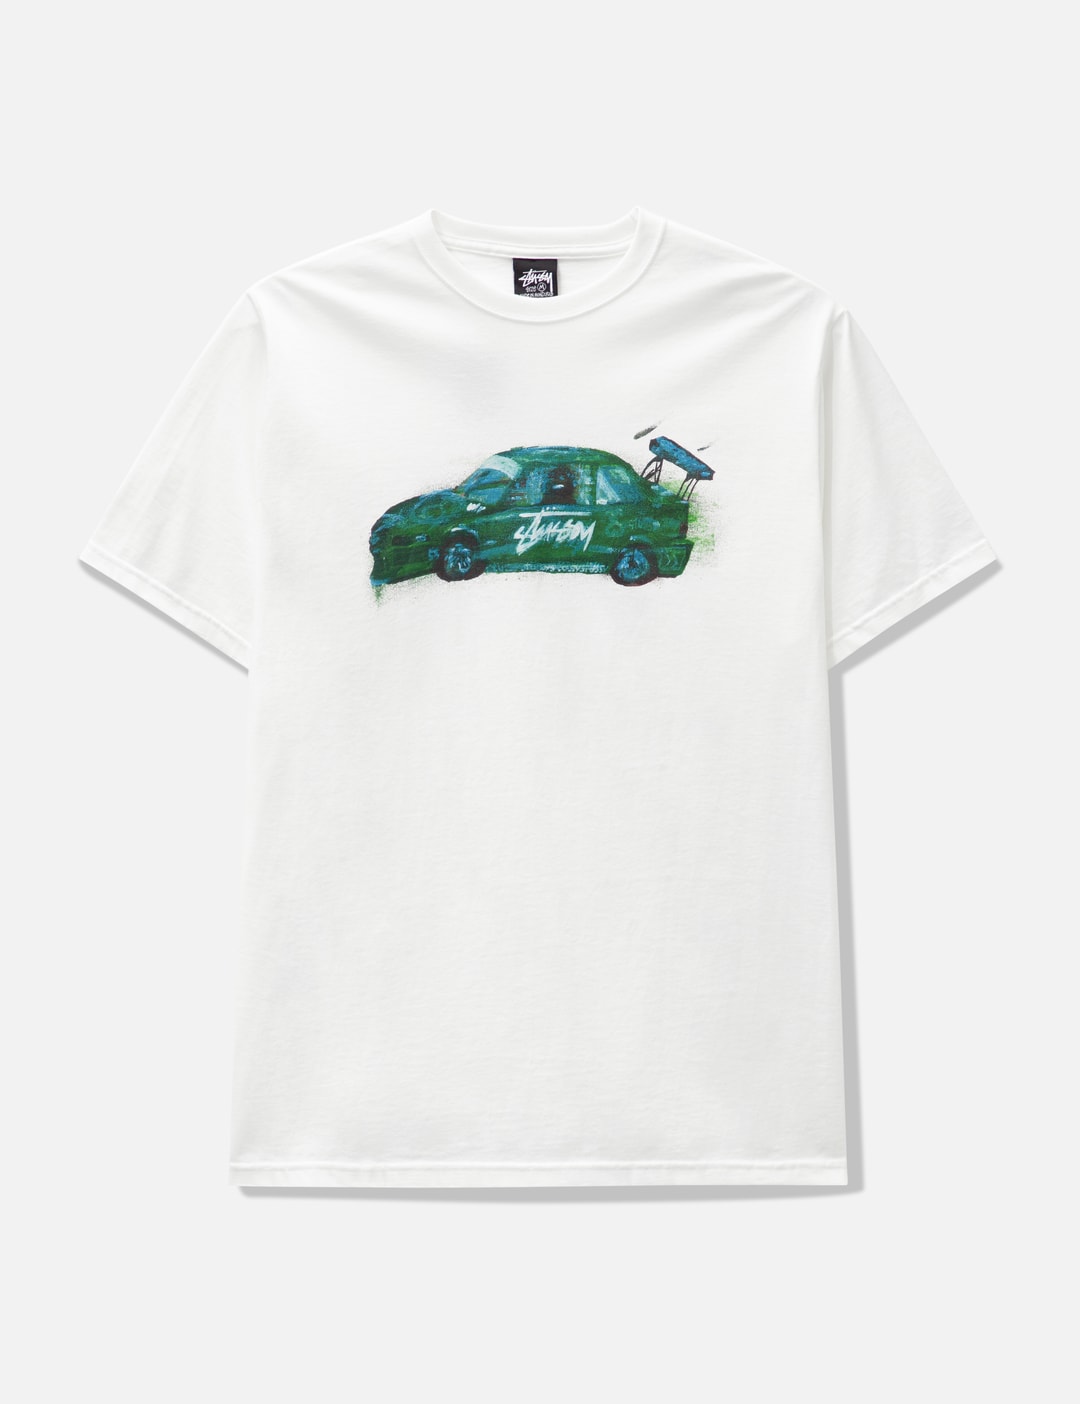 Stüssy - Race Car T-shirt | HBX - Globally Curated Fashion and ...